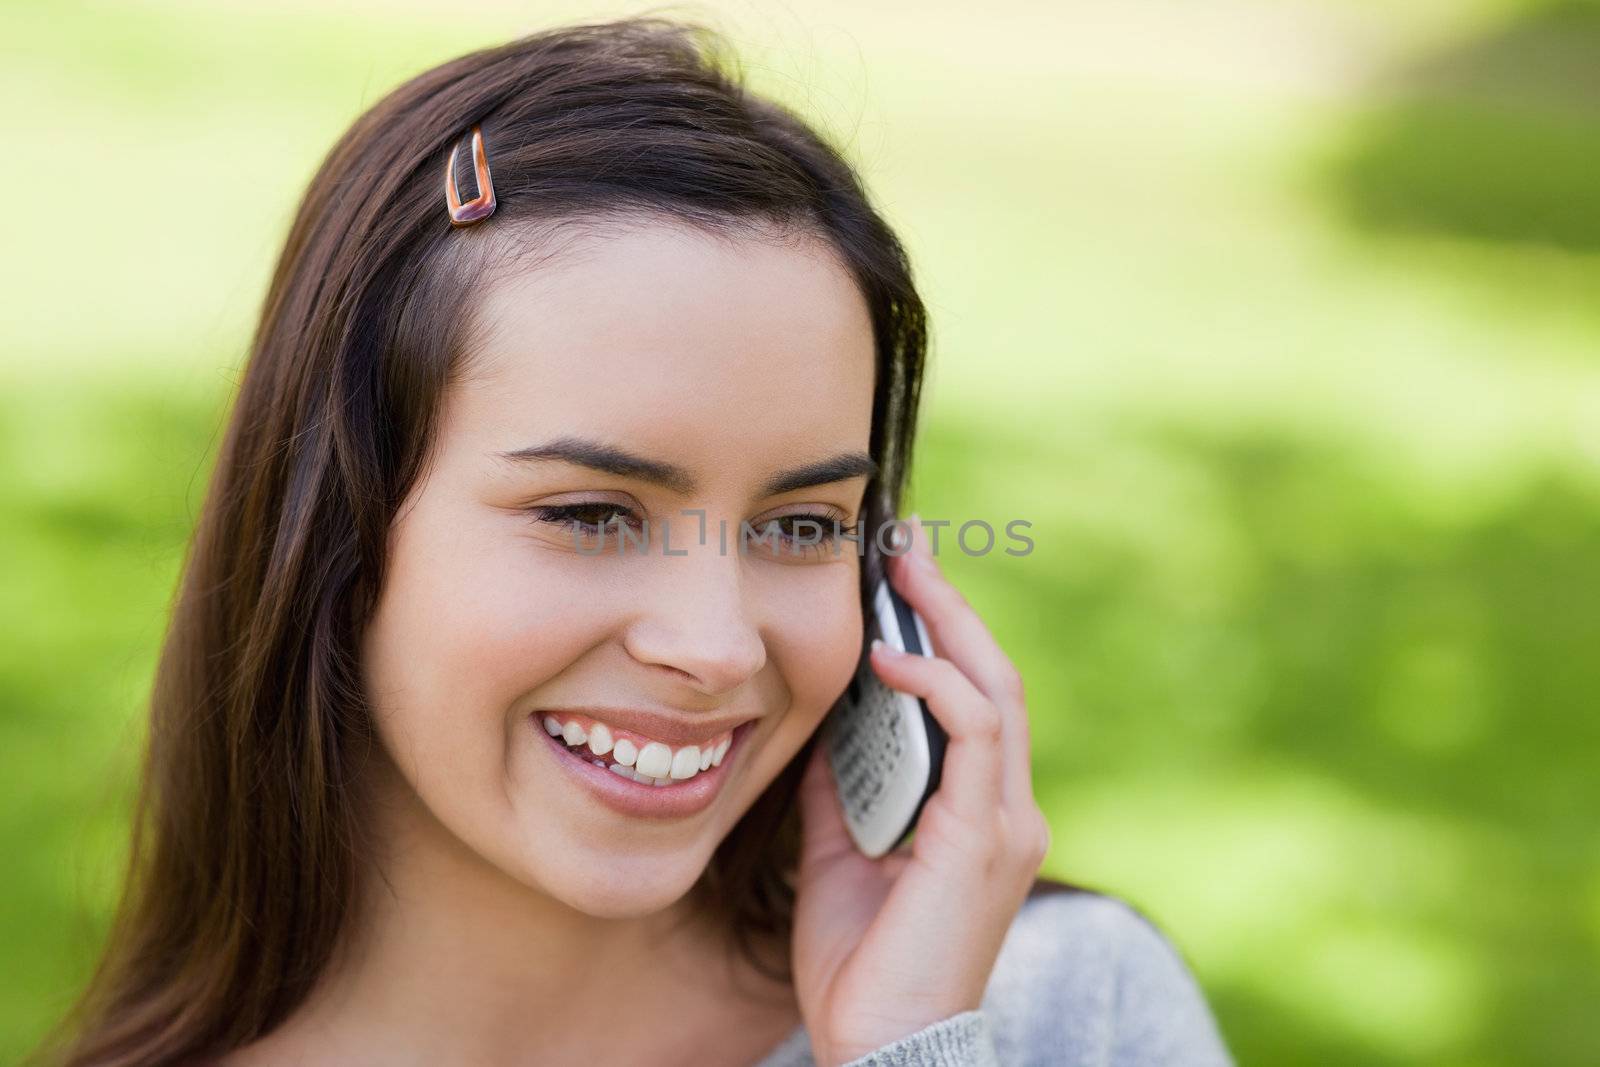 Smiling young woman using her mobile phone while standing in a parkland